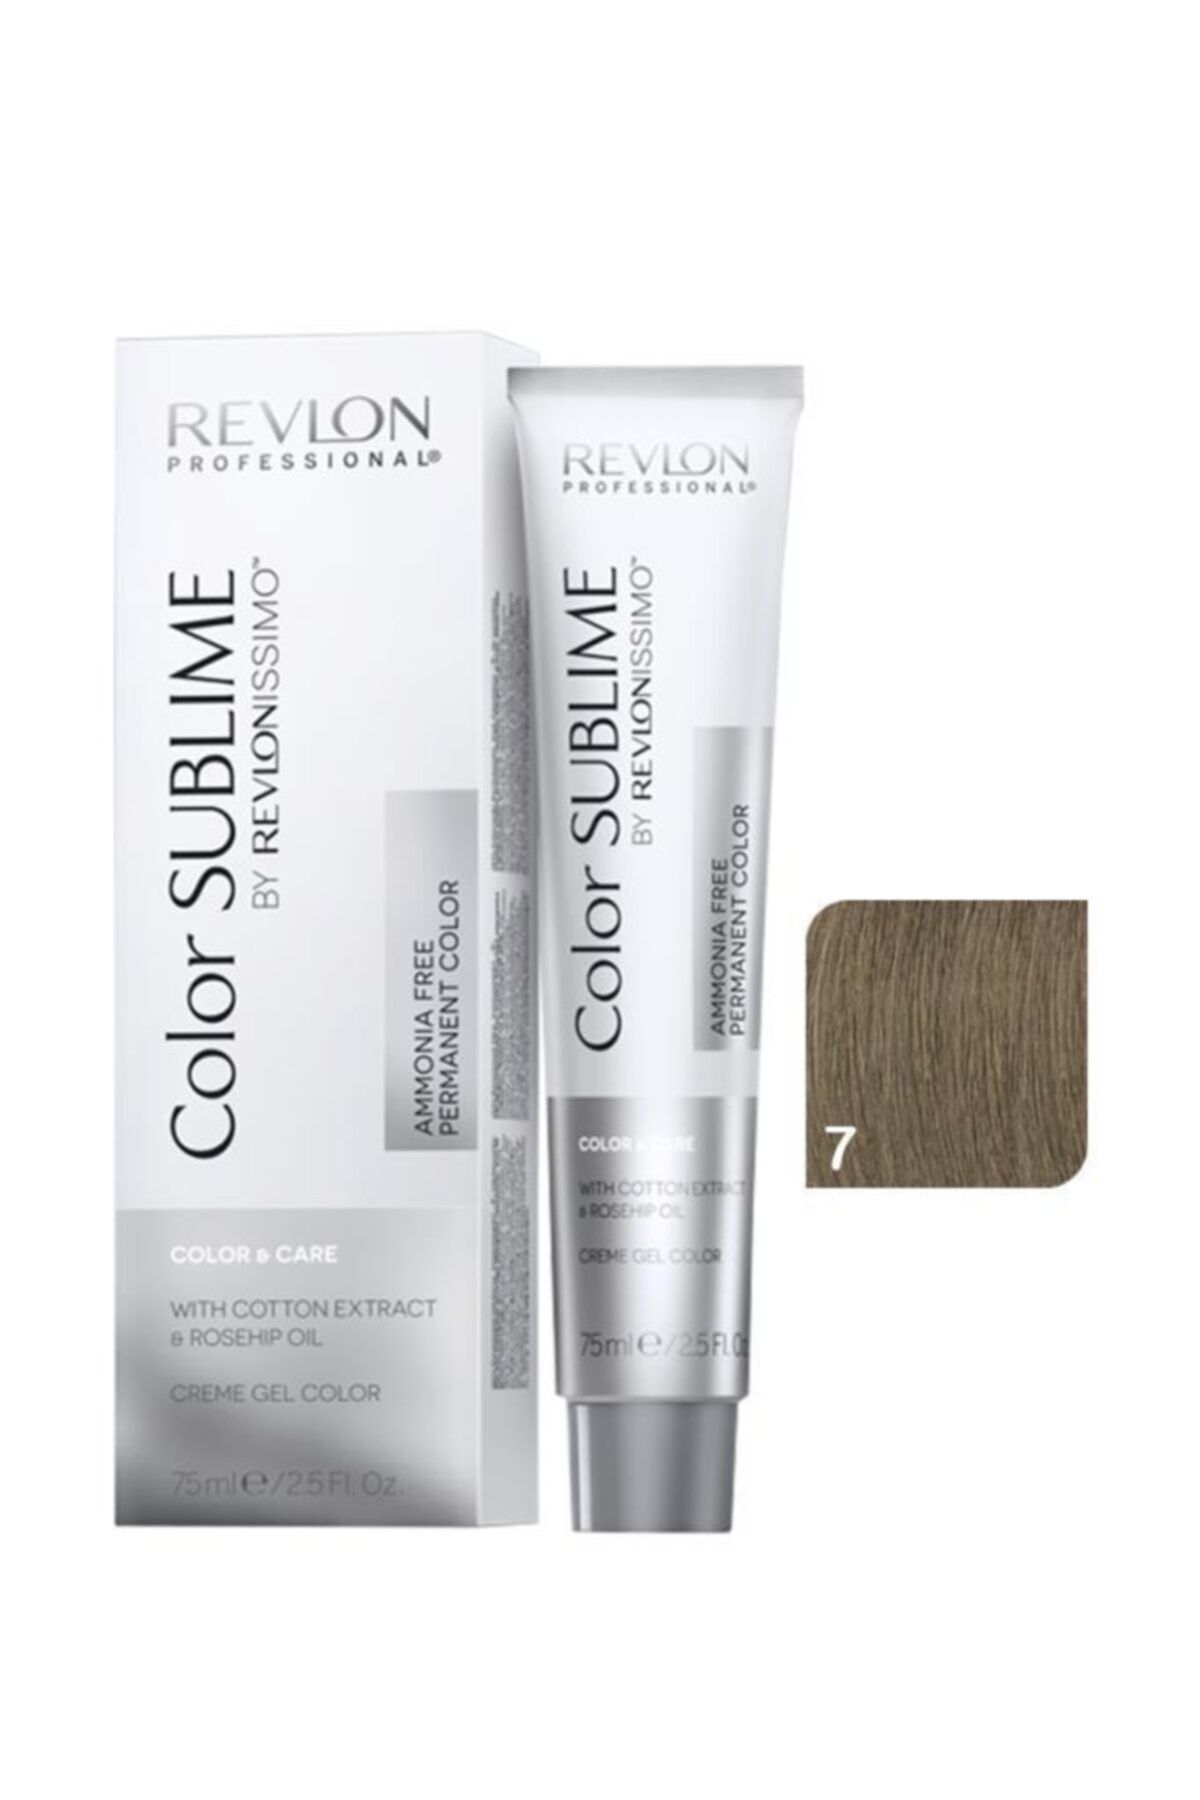 Revlon Issimo Color Sublime Color & Care 7 Orta Kumral